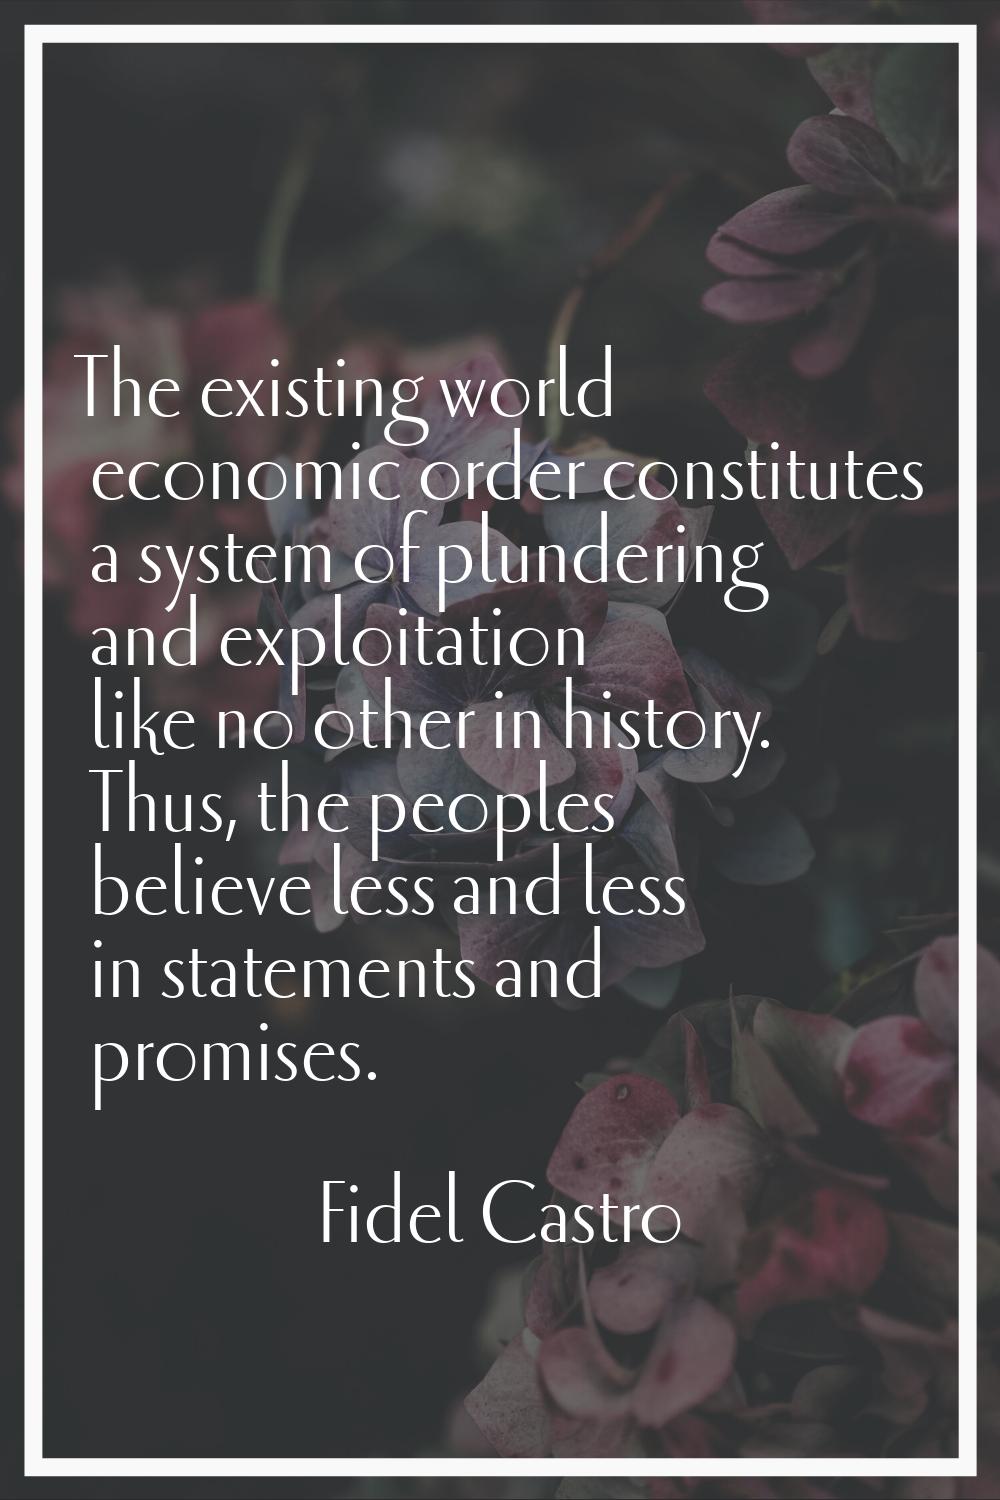 The existing world economic order constitutes a system of plundering and exploitation like no other